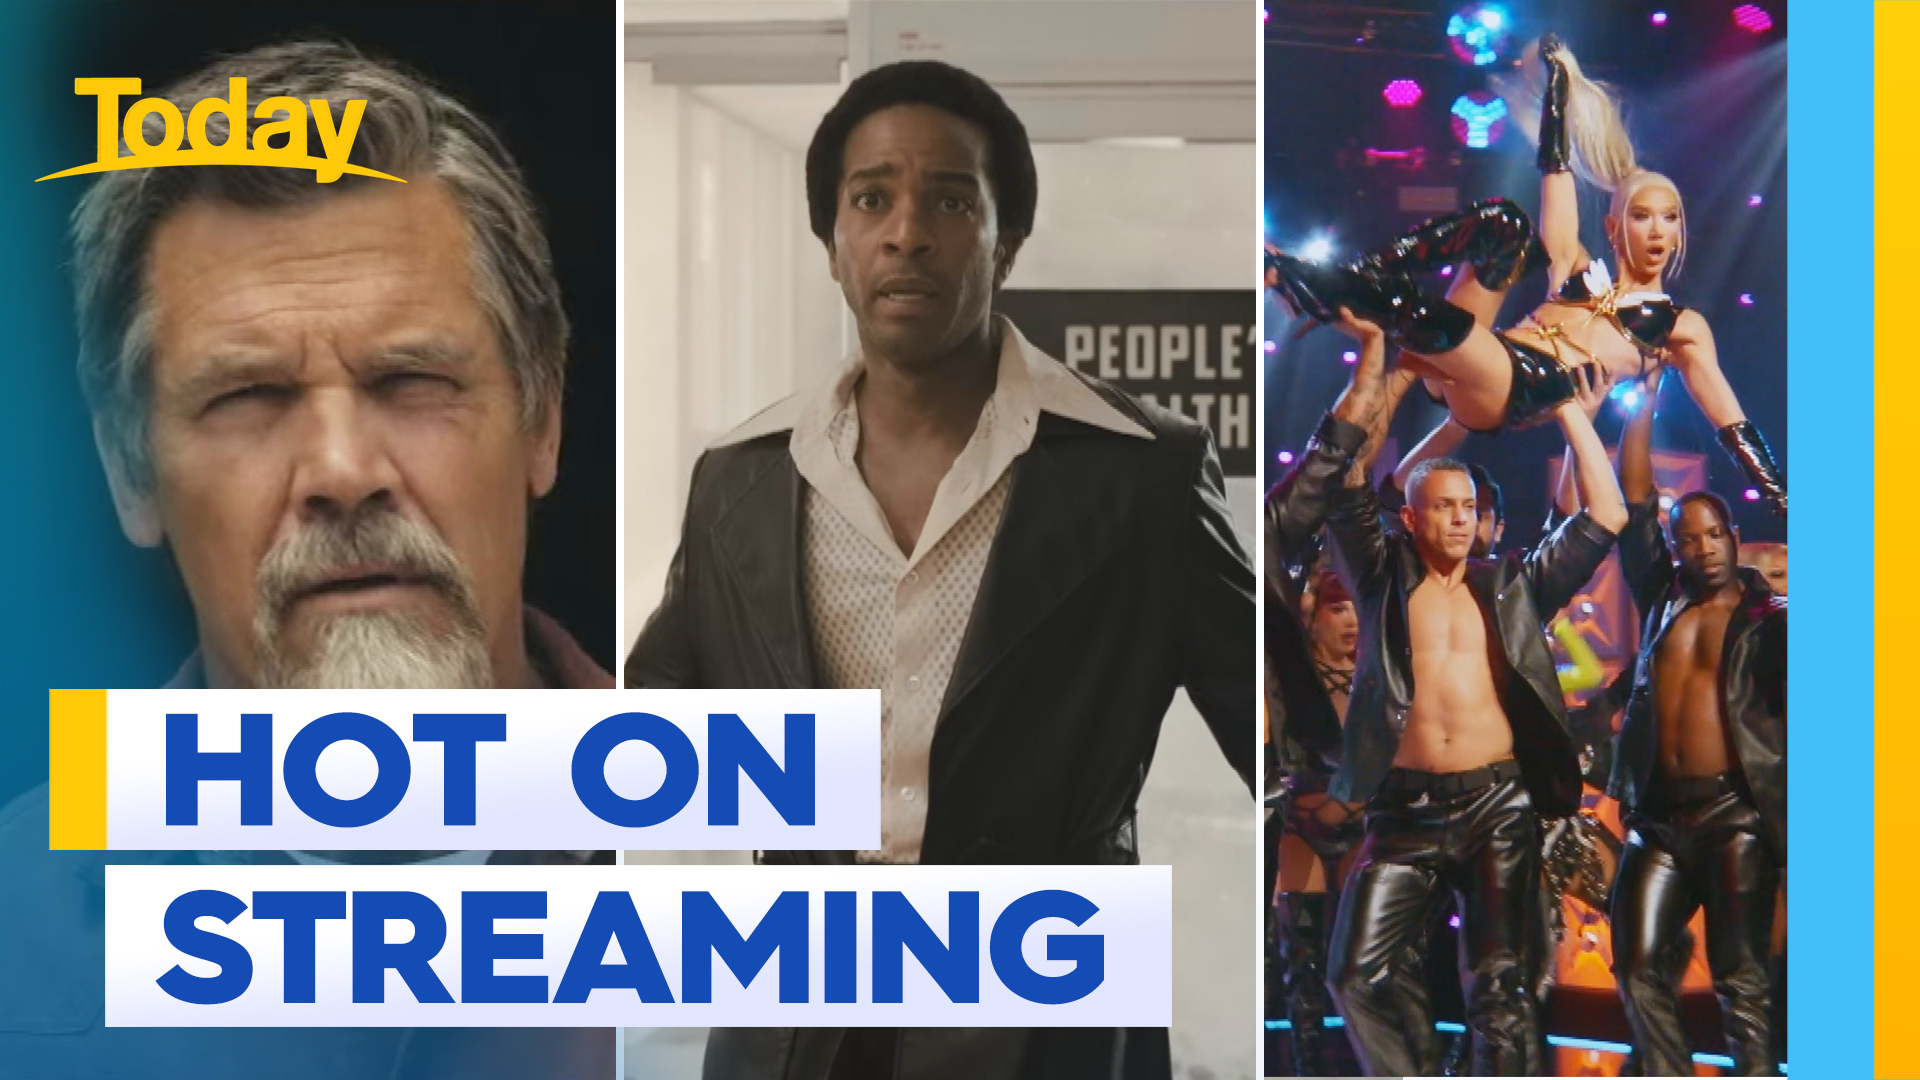 What's hot on streaming this week